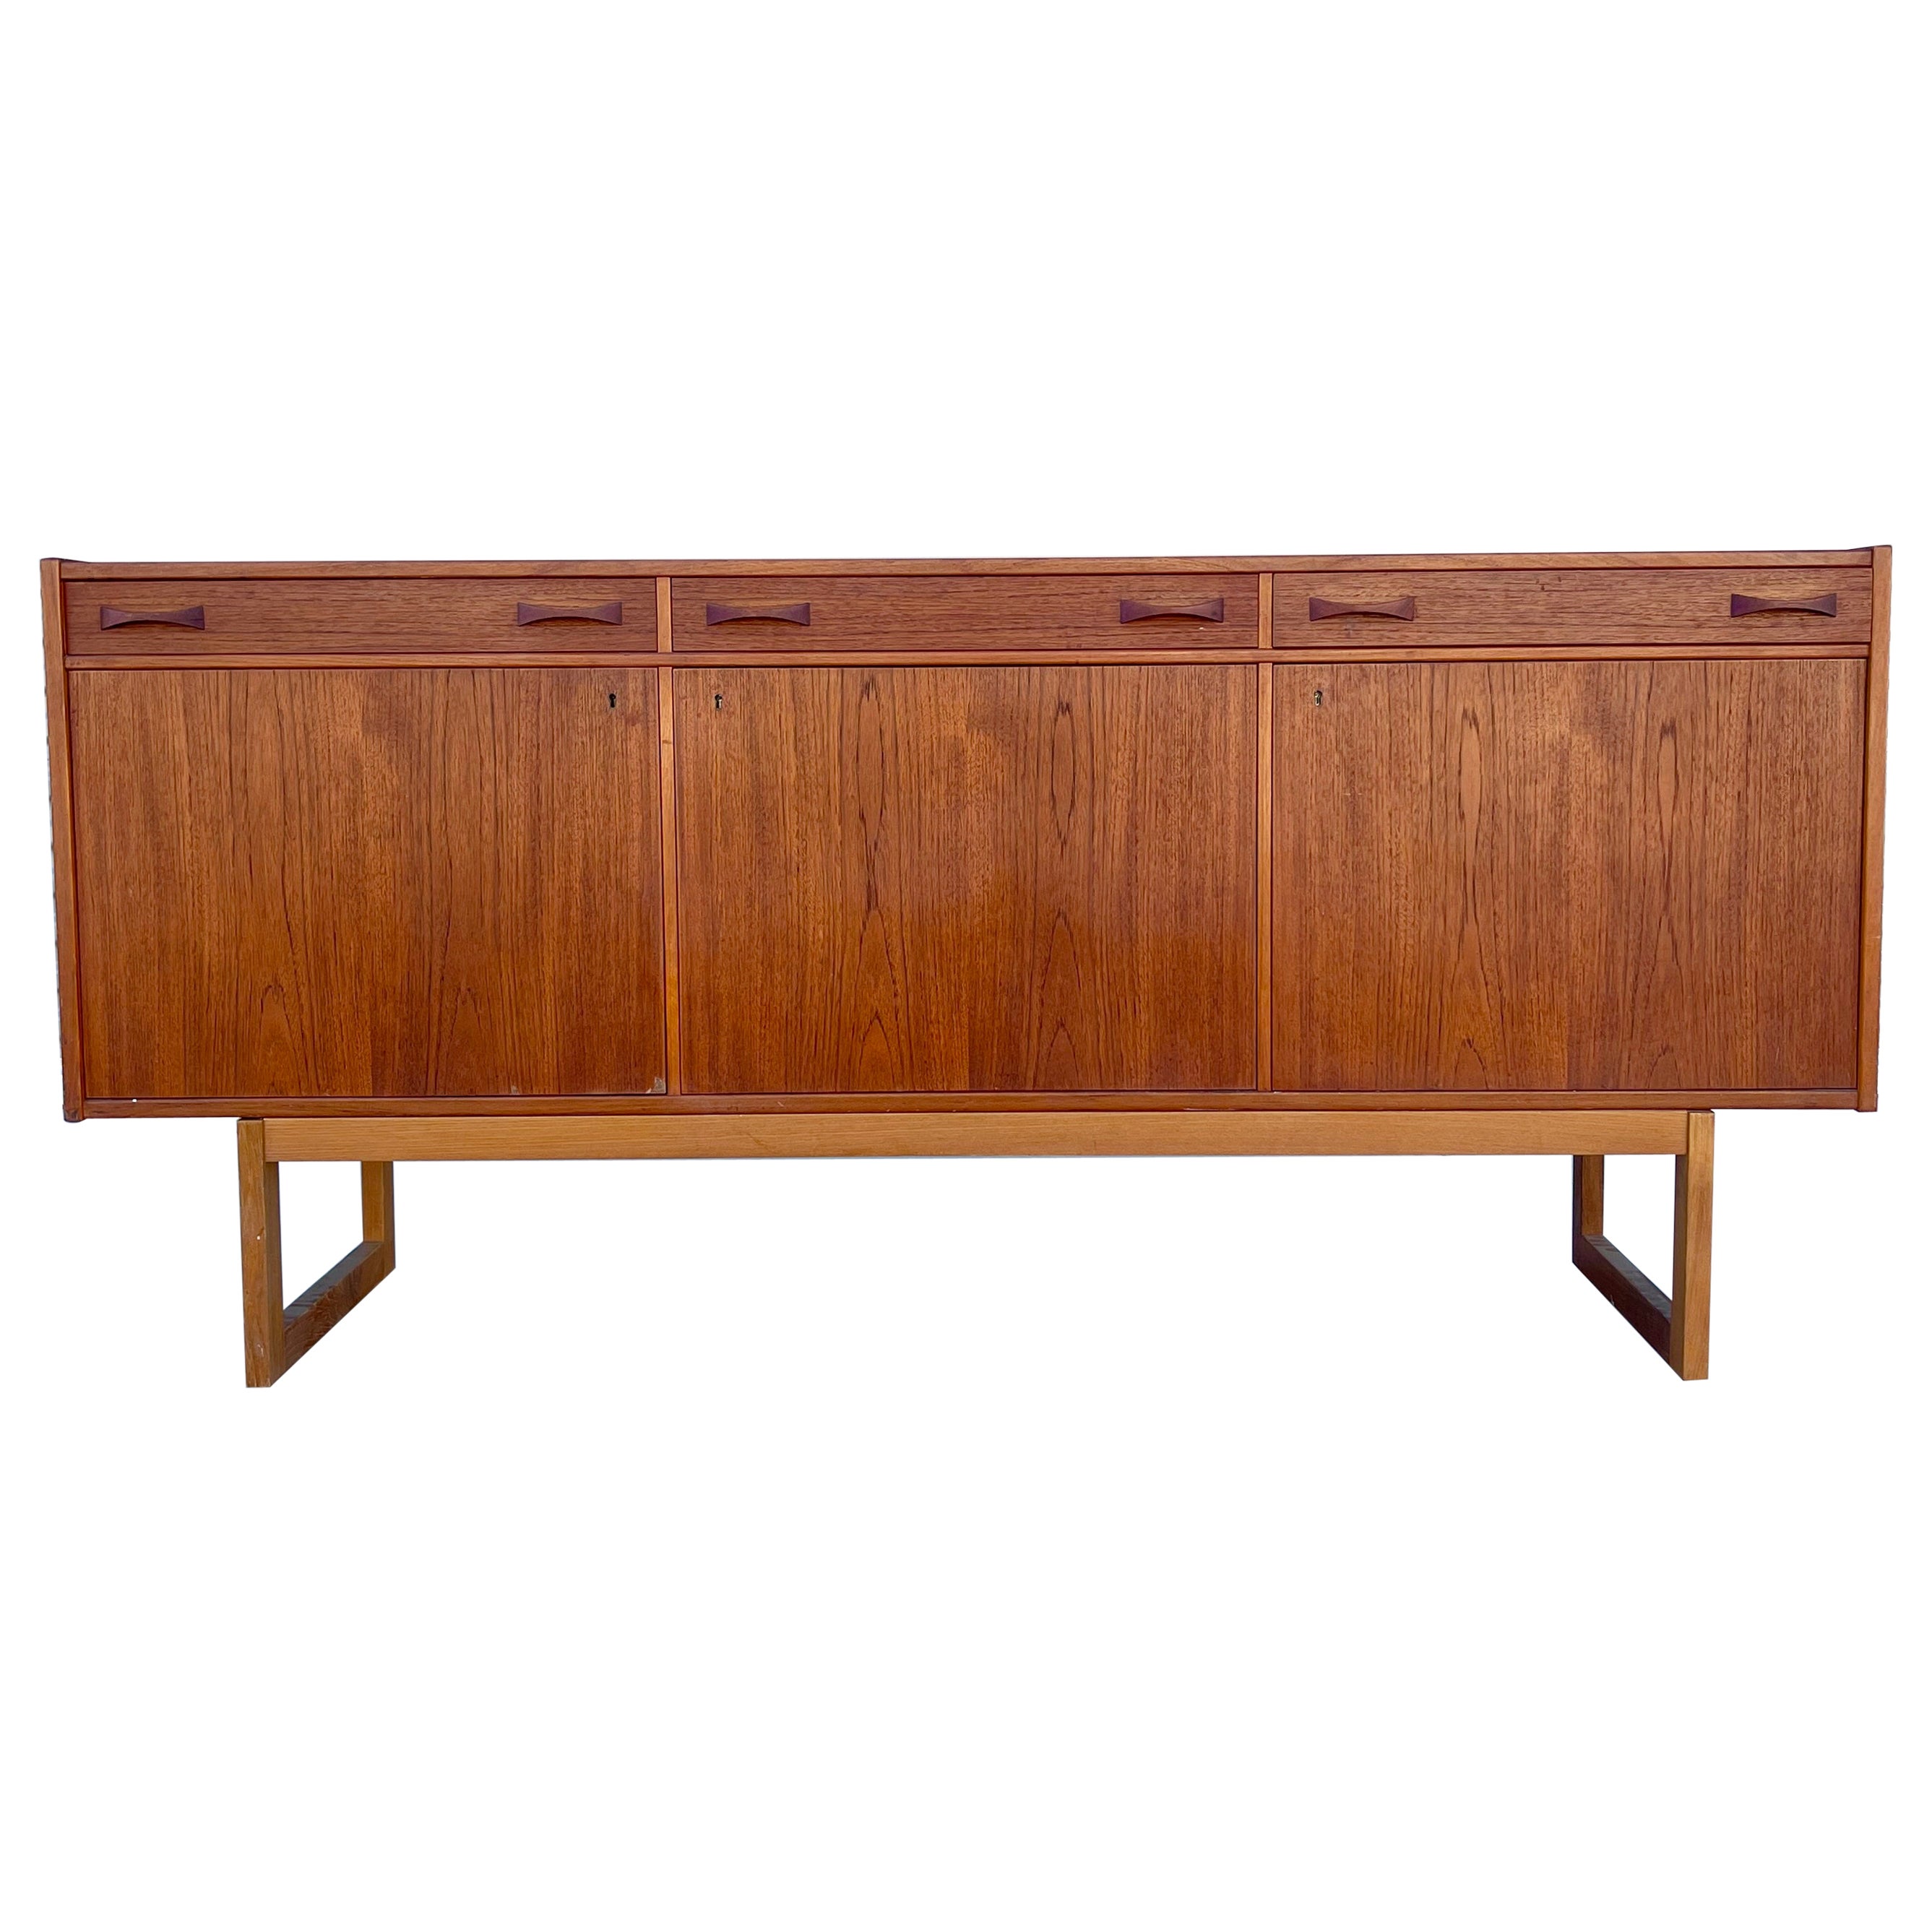 1960s Mid Century Teak Sideboard by Age Olofsson for Ulferts Mobler